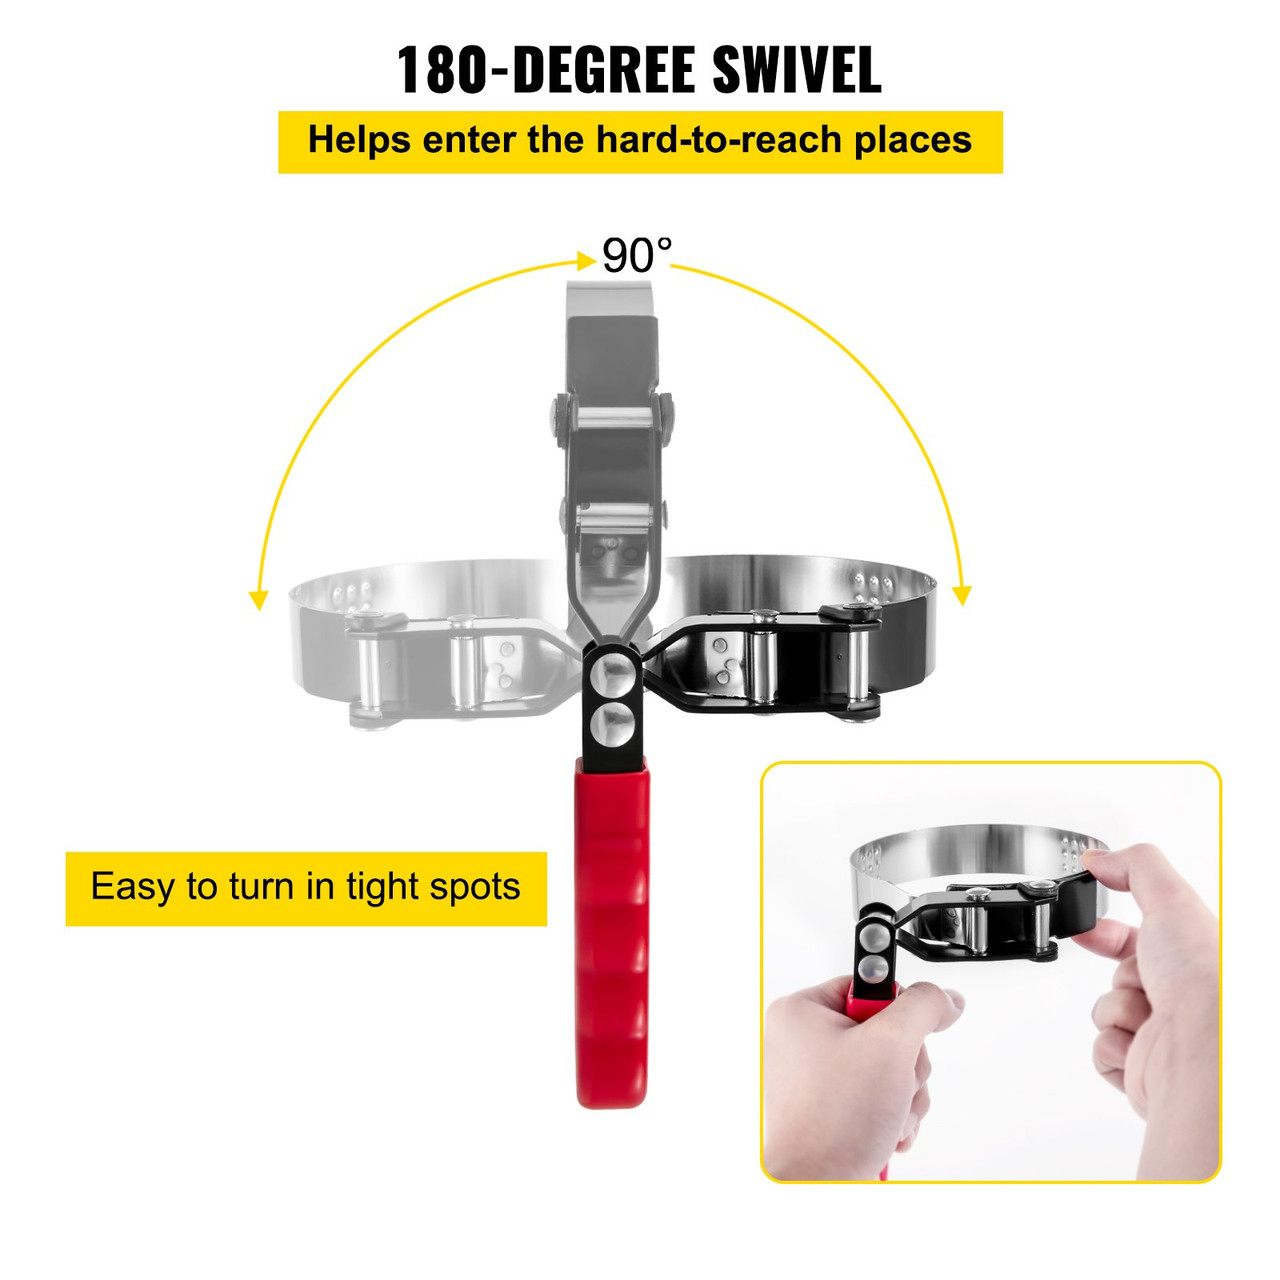 Swivel Oil Filter Wrench, 4 Pieces Oil Filter Swivel Wrench 2-3/4" to 3-1/4", 3-1/2" to 3-3/4" Oil Filter Strap Wrench, 4" to 4-1/2" Oil Filter Band Wrench, 4-3/4" to 5-1/4" Filter Wrenches